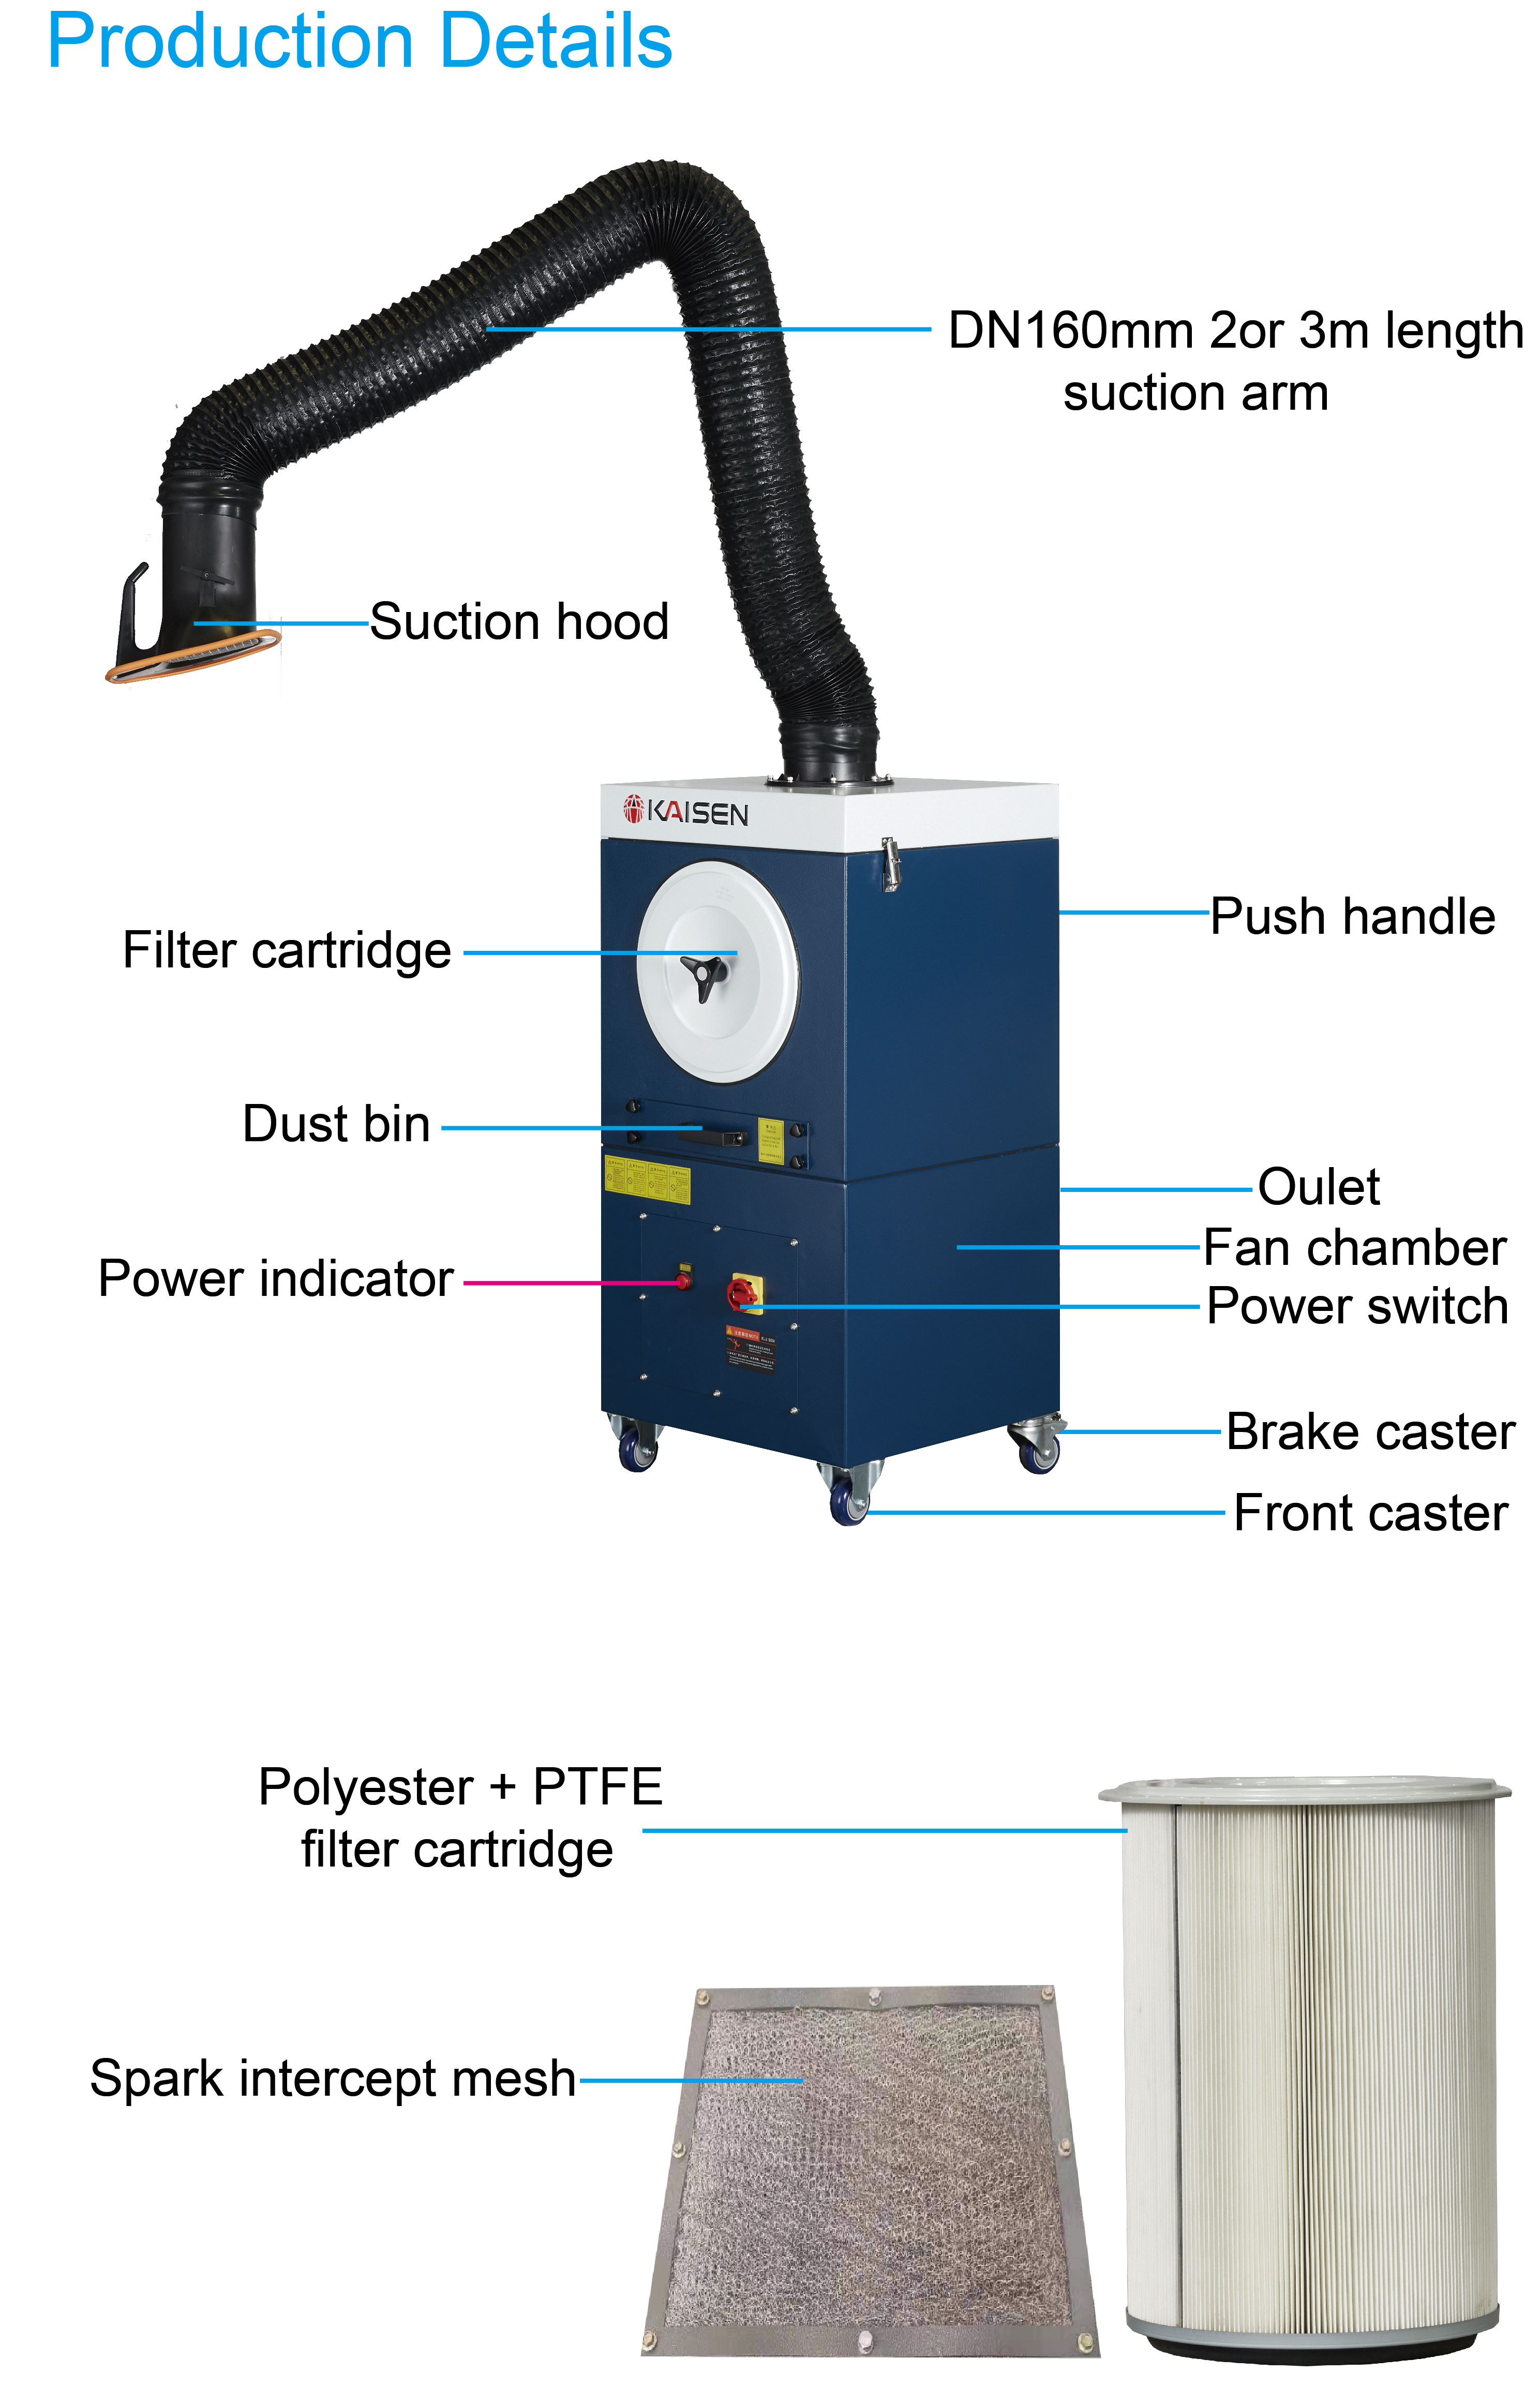 Portable Welding Fume Extractor With Single 3M160mm Flexible Suction Arm For Industrial Dust Collection